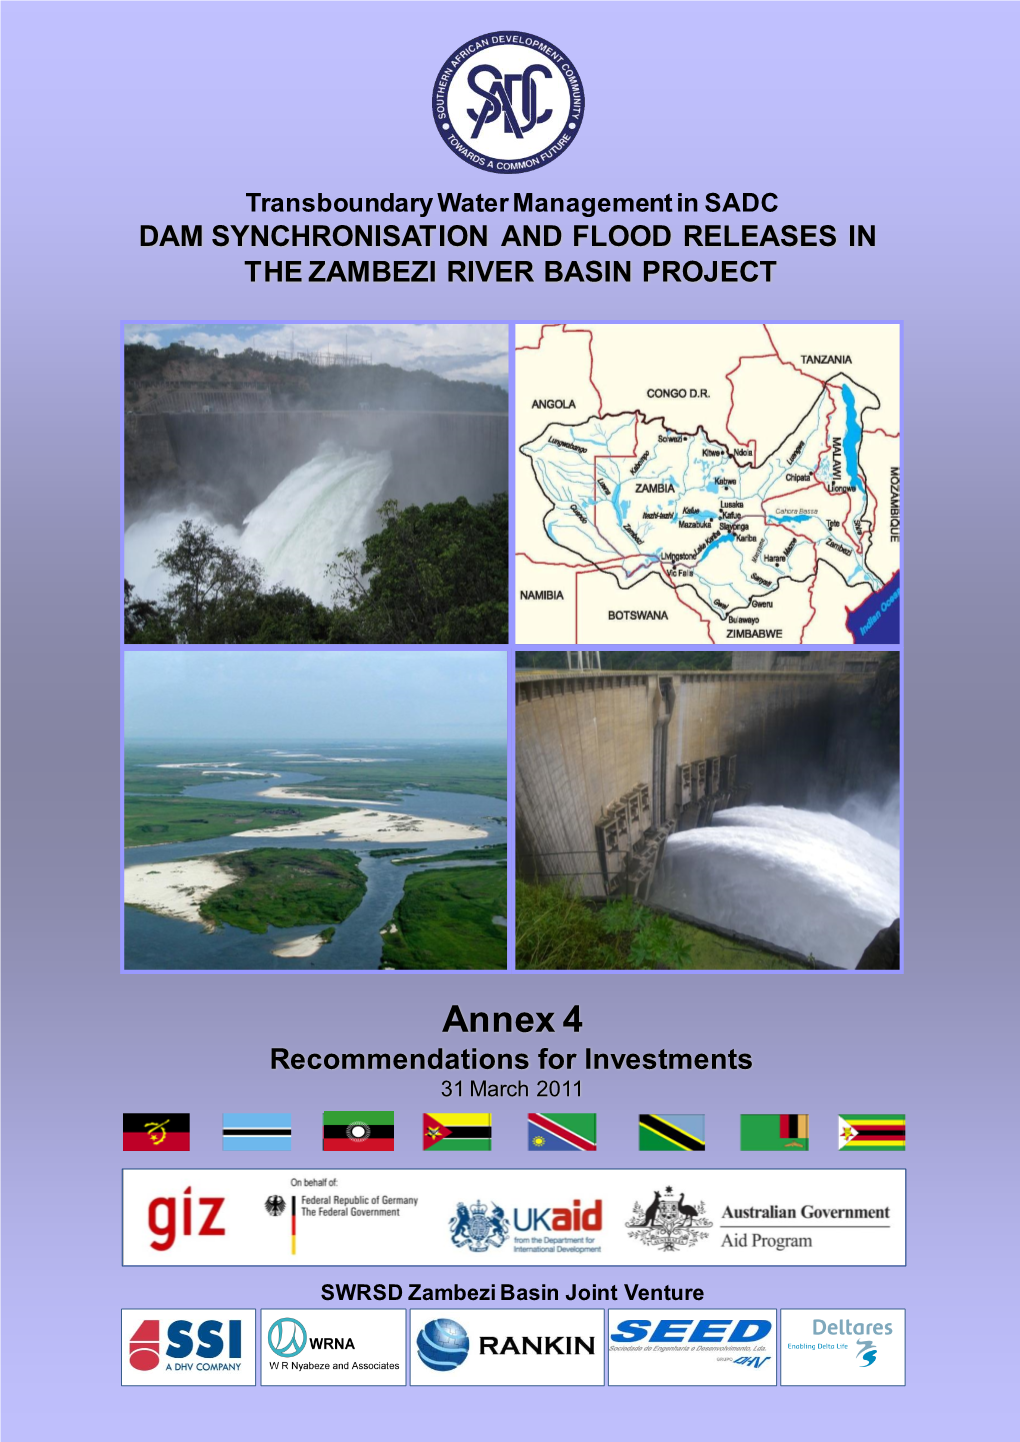 Dam Synchronisation and Flood Releases in the Zambezi River Basin Project Annex 4